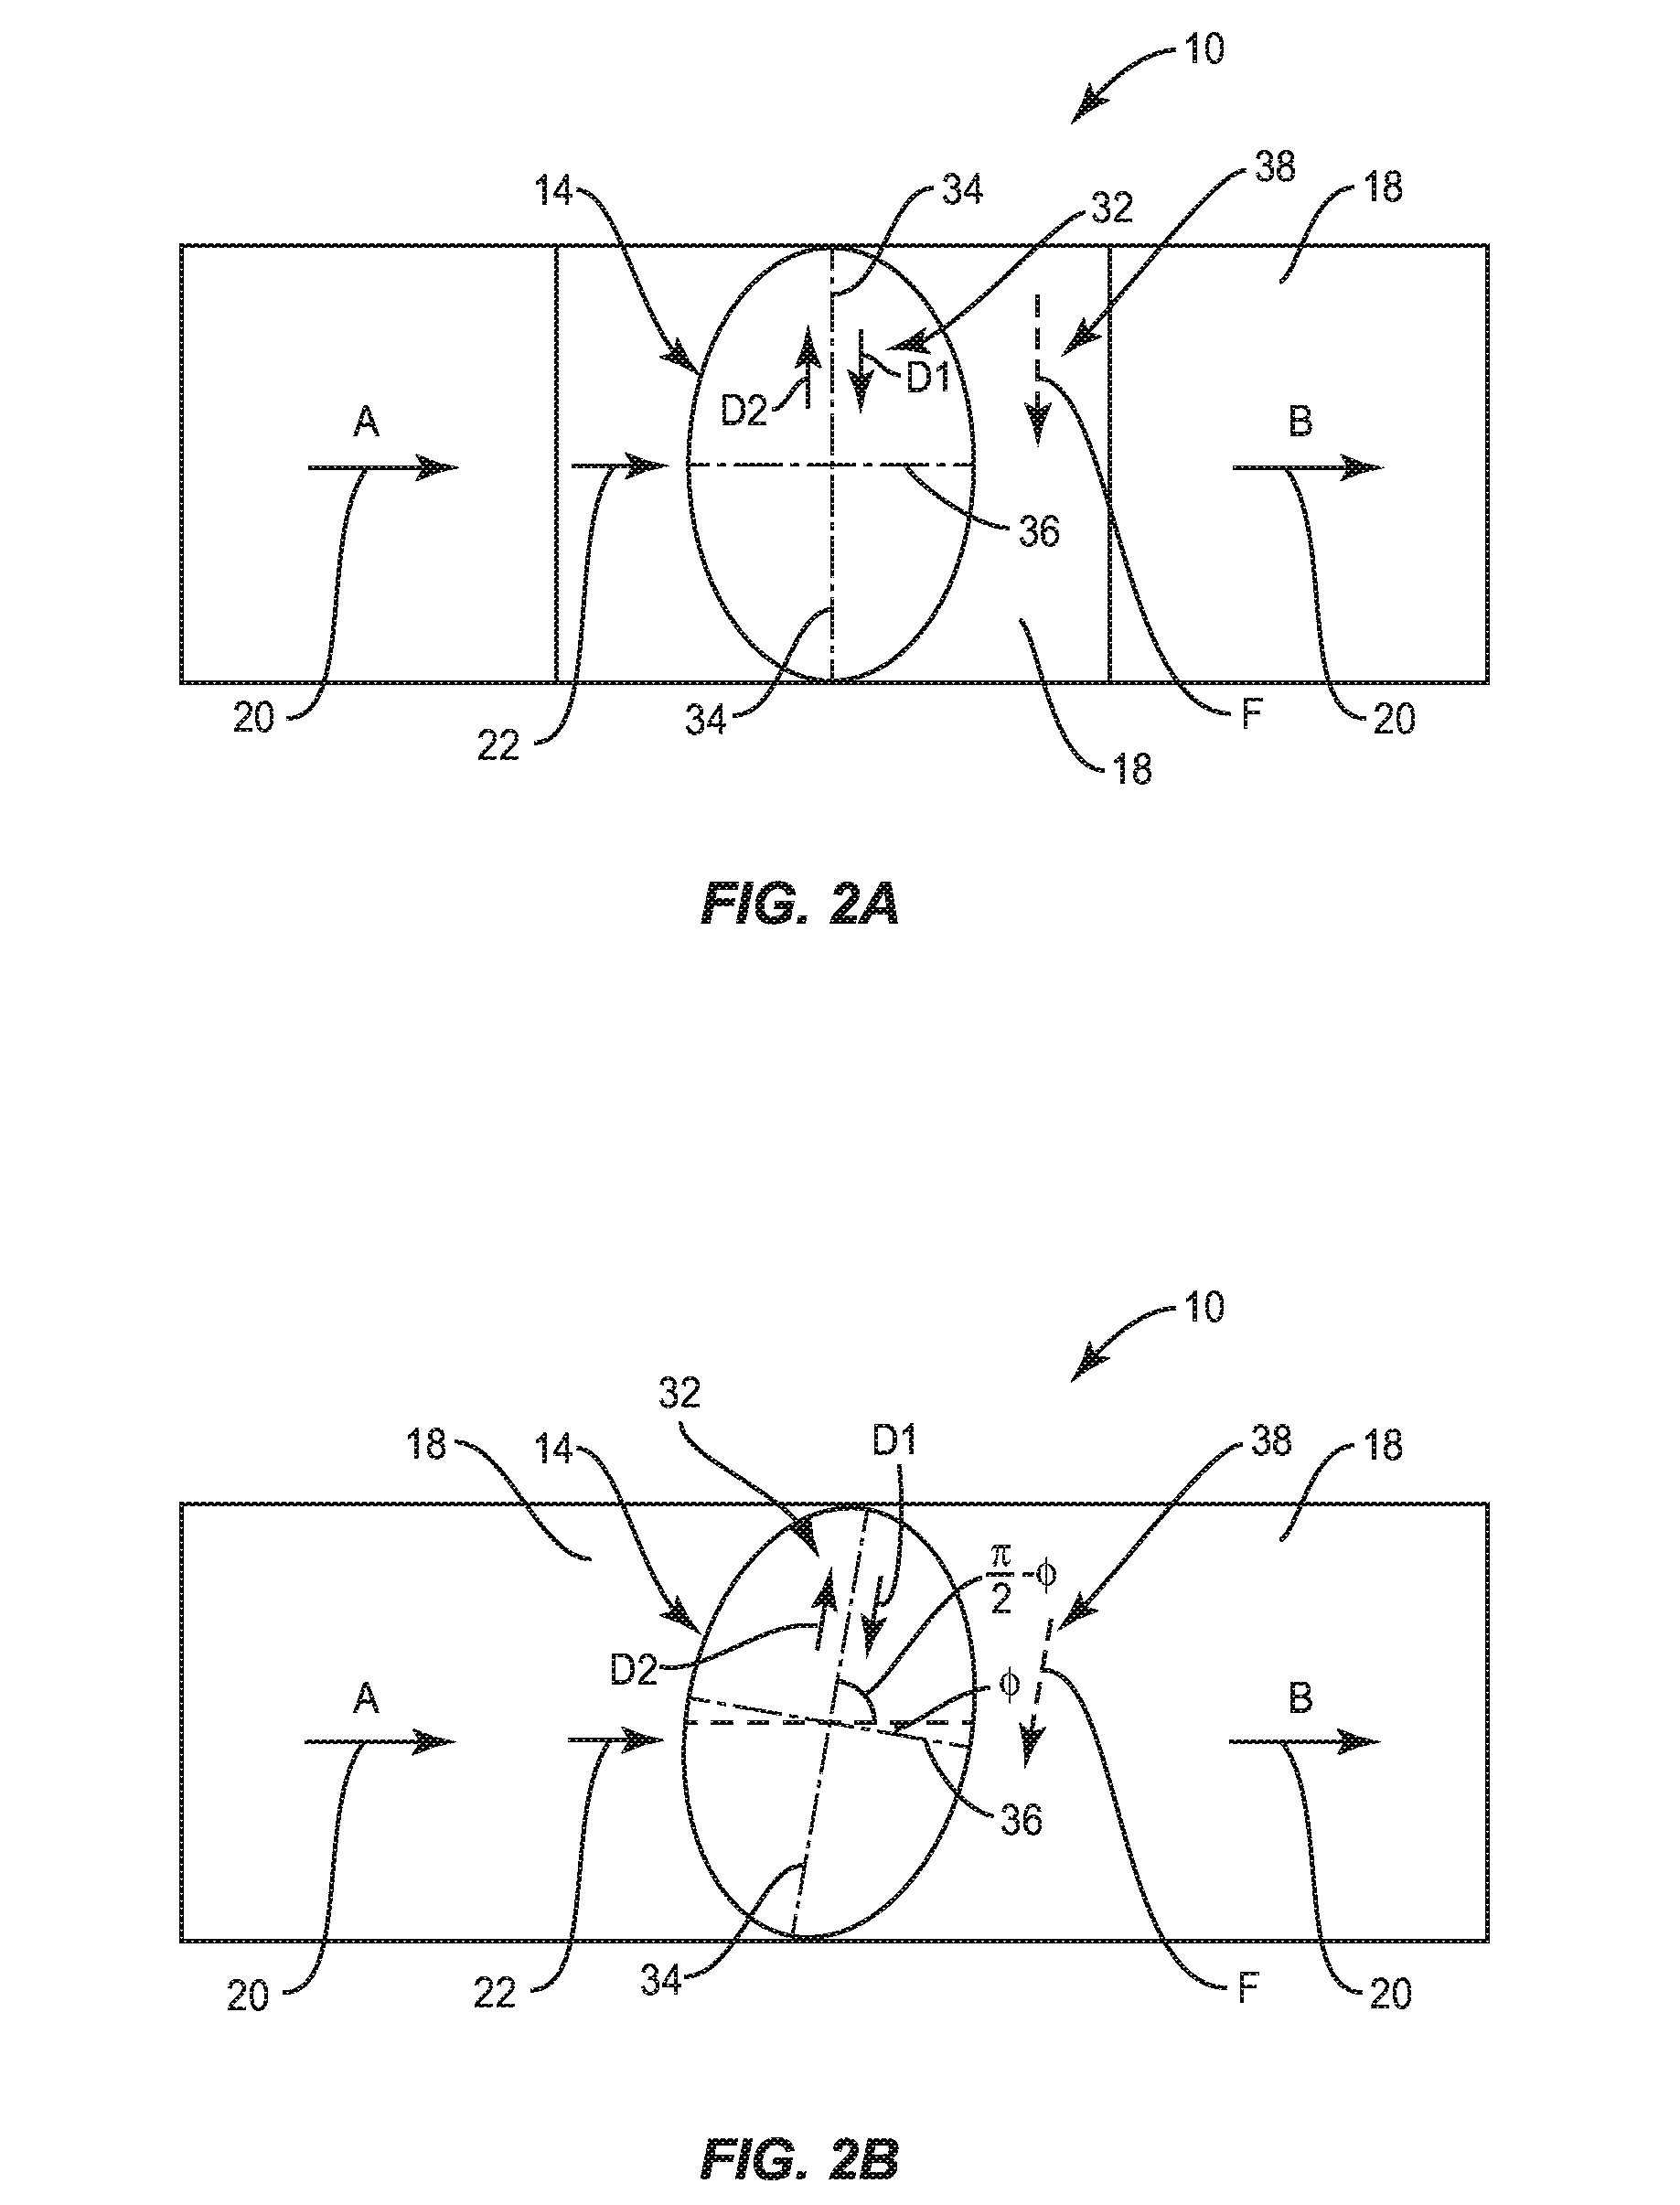 Spintronic logic gates employing a giant spin hall effect (GSHE) magnetic tunnel junction (MTJ) element(s) for performing logic operations, and related systems and methods